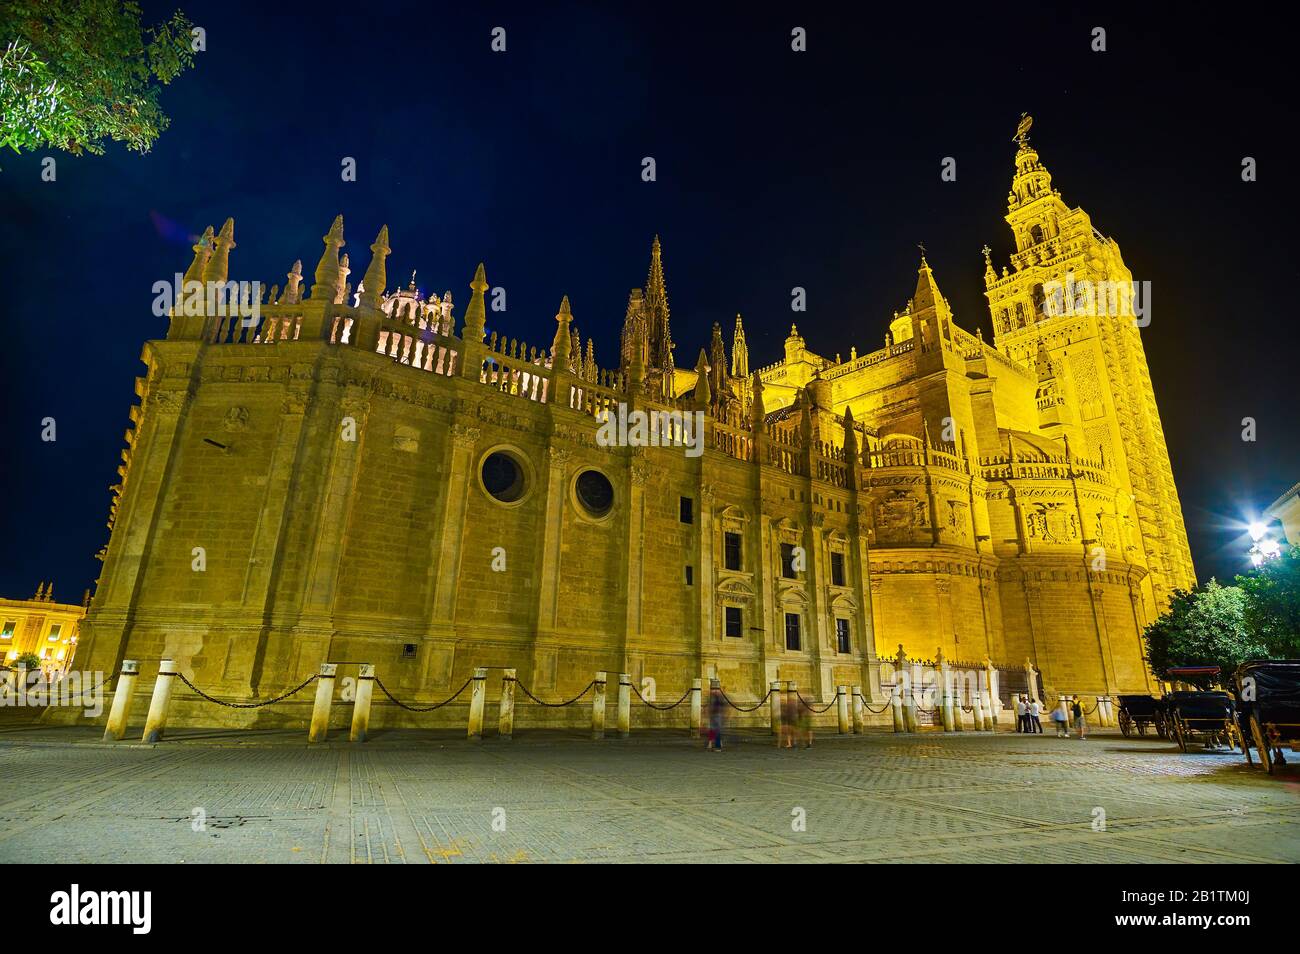 The amazing night illumination of huge Seville Cathedral, the most notable landmark of the city, Spain Stock Photo